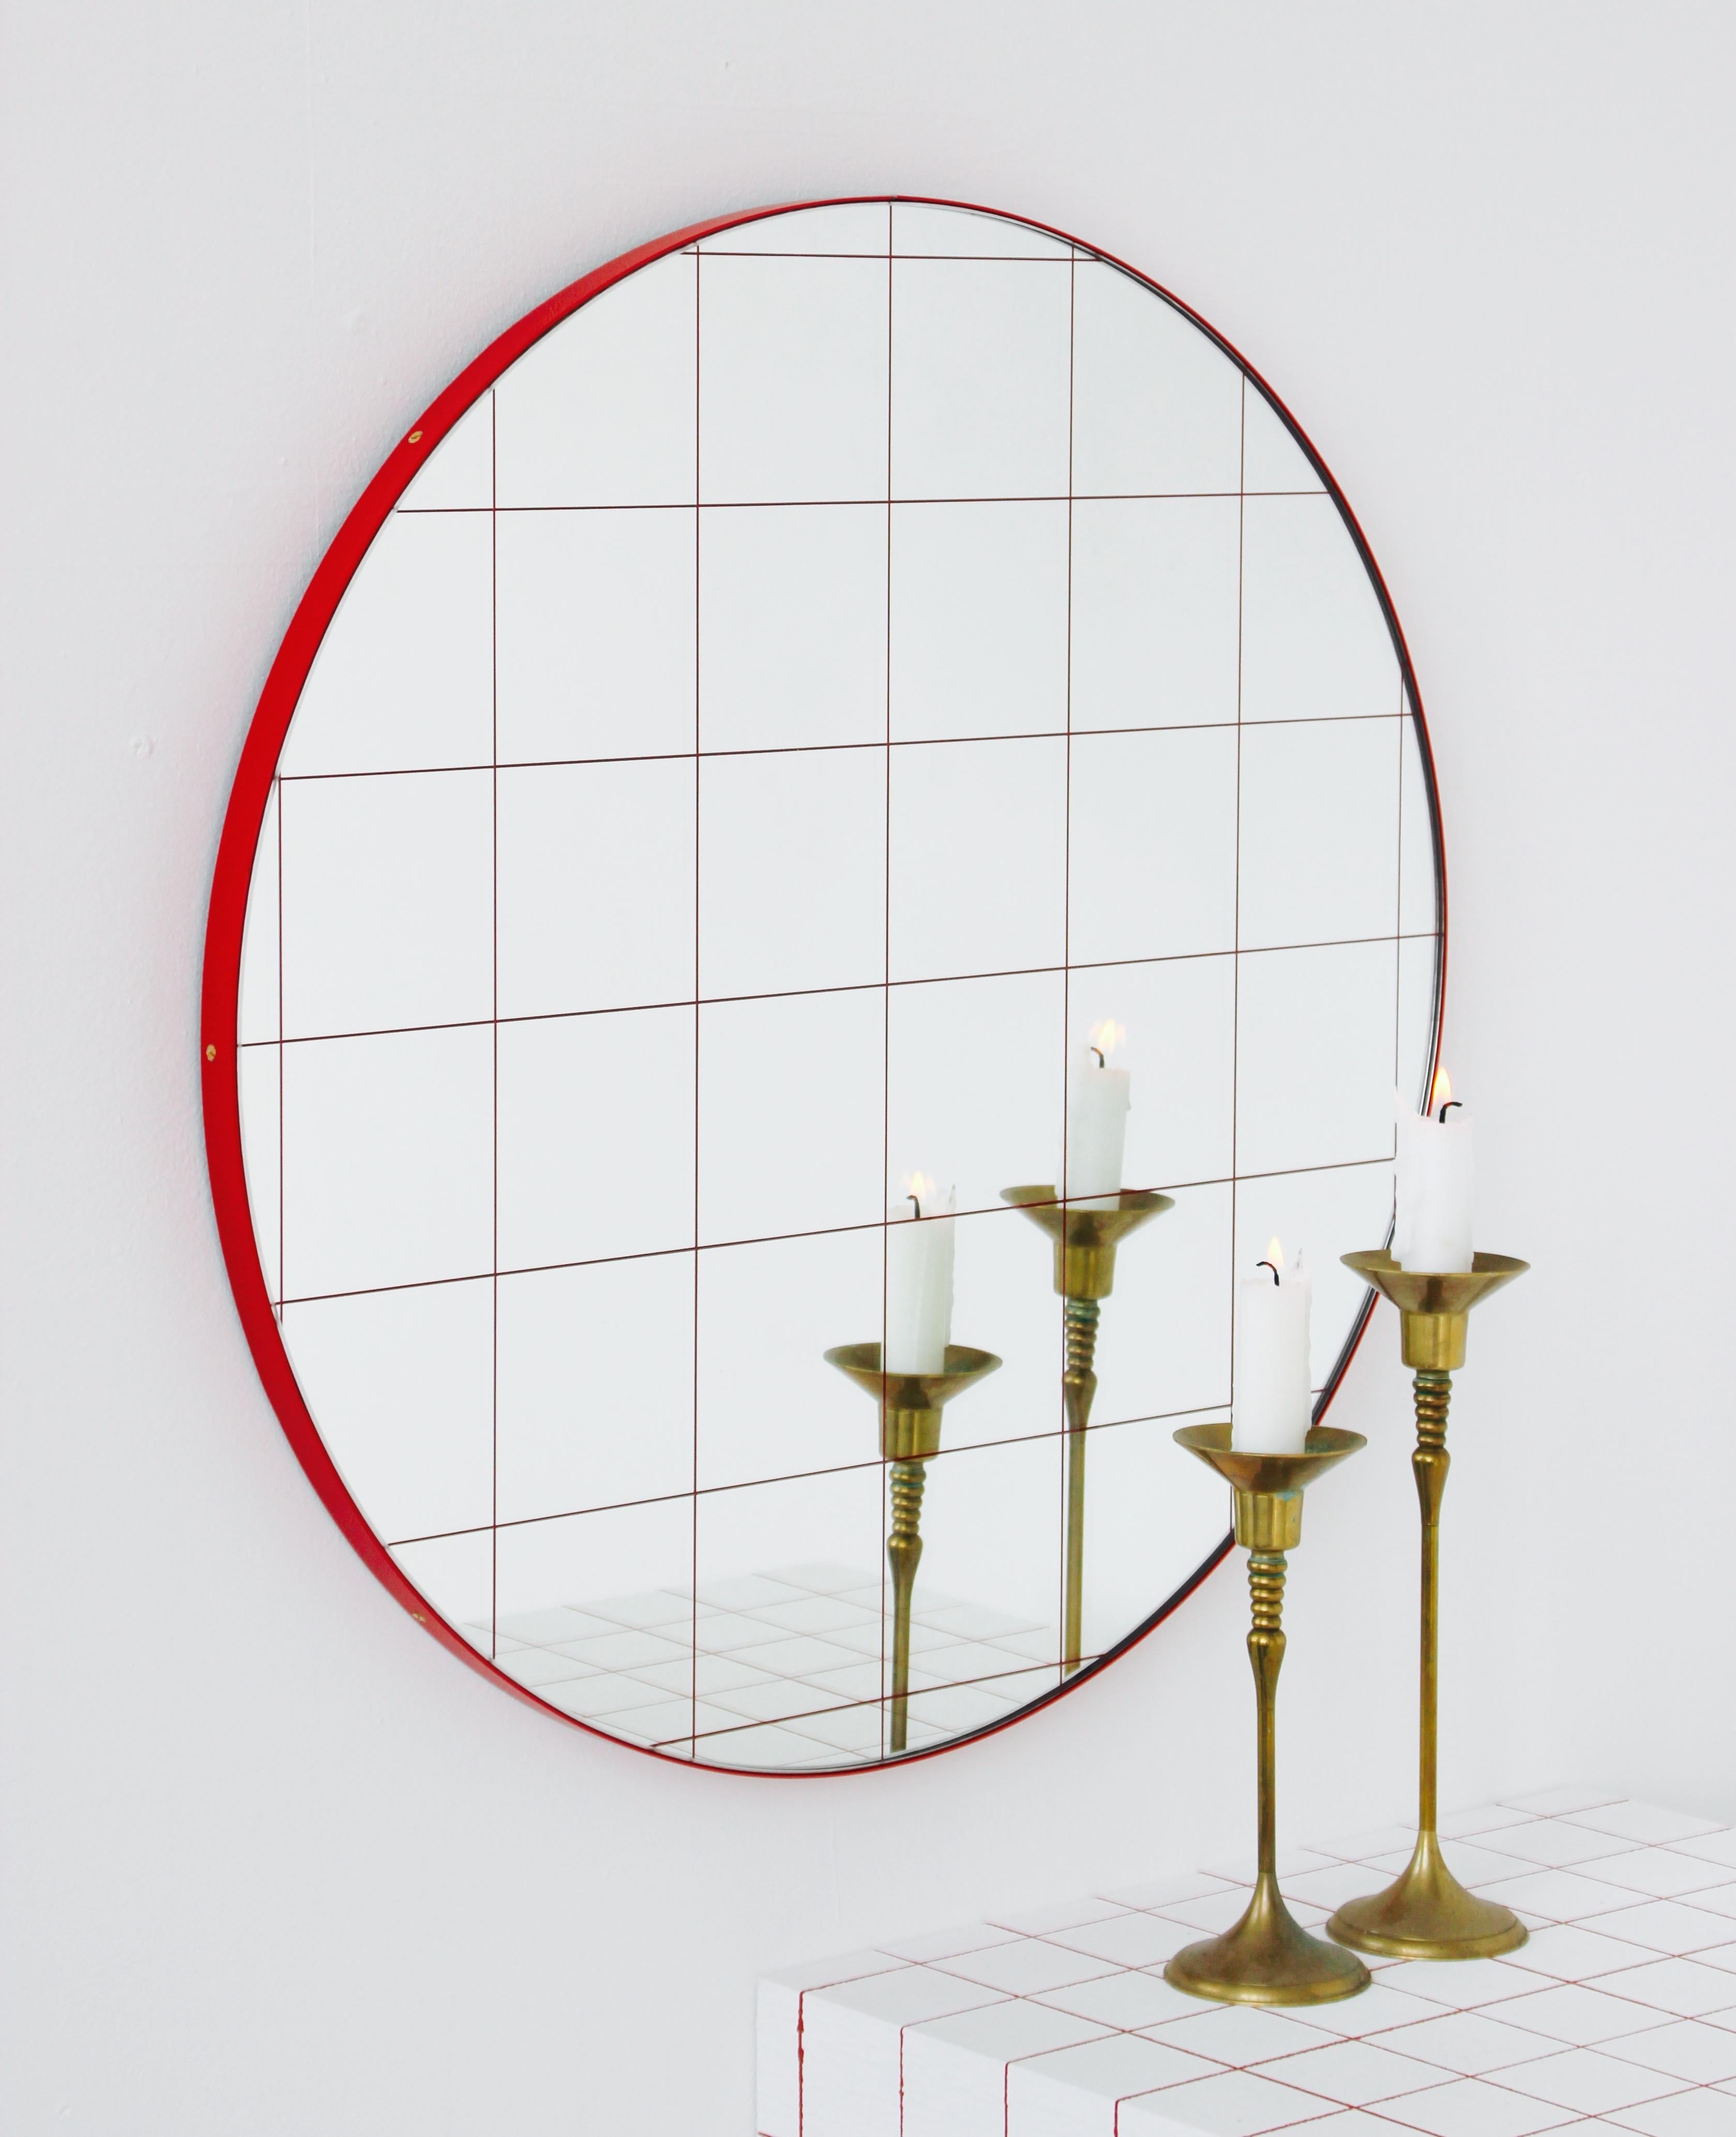 Sandblasted Orbis Red Grid Round Contemporary Mirror with Red Frame, Large